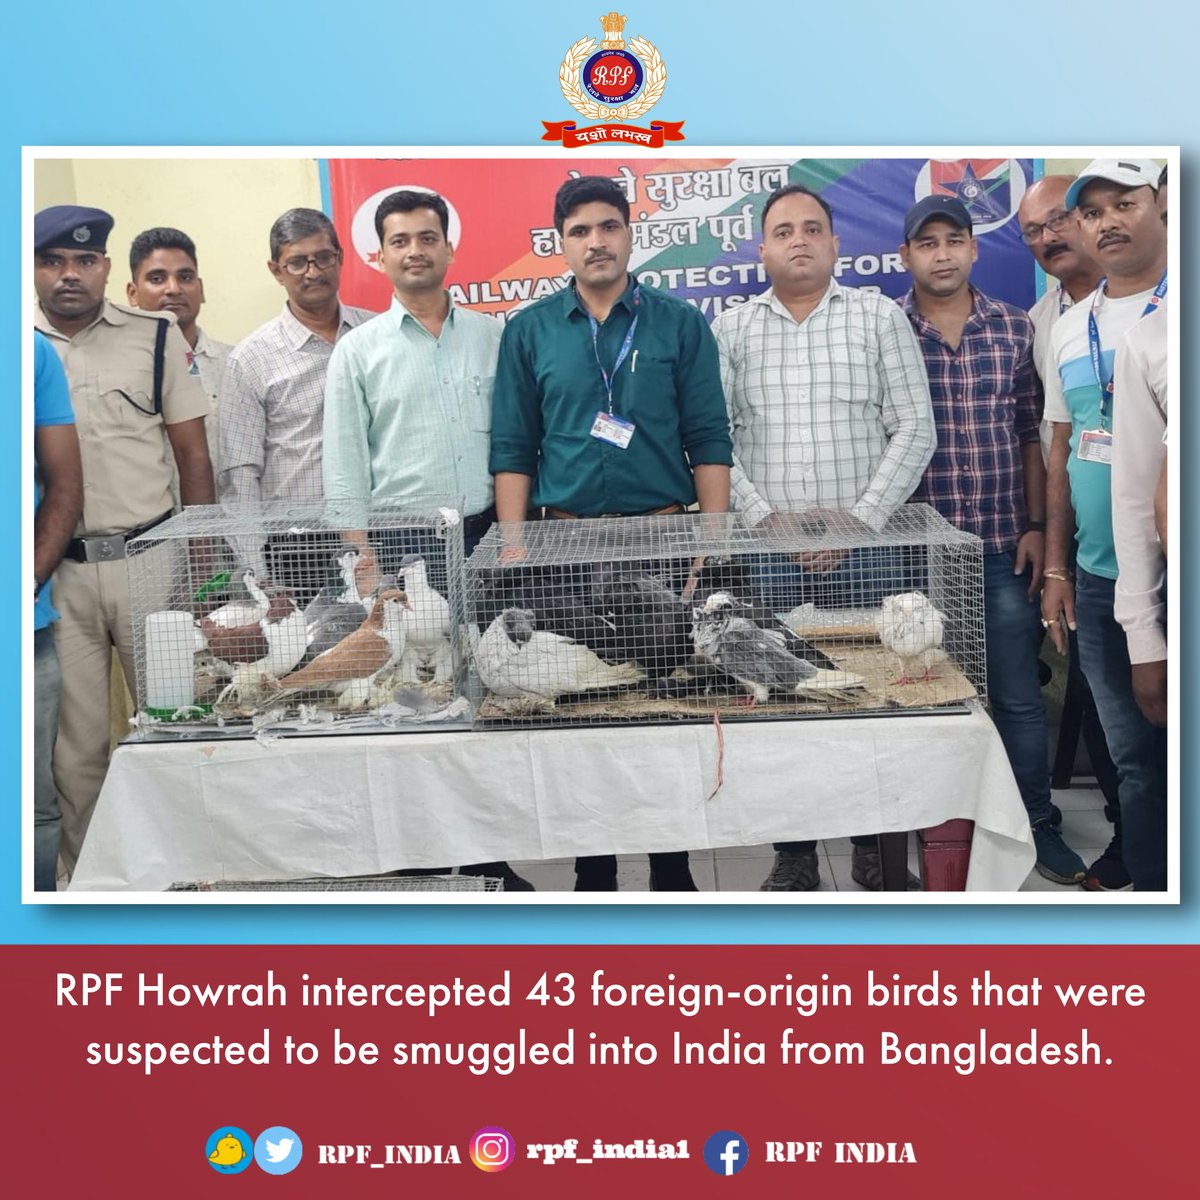 It's alarming to see how exotic birds are being smuggled into India for monetary gains. 
Let's pledge to say #NO to any form of #wildlifetrafficking and help preserve our planet's biodiversity.
#OperationWilep #WildlifeProtection